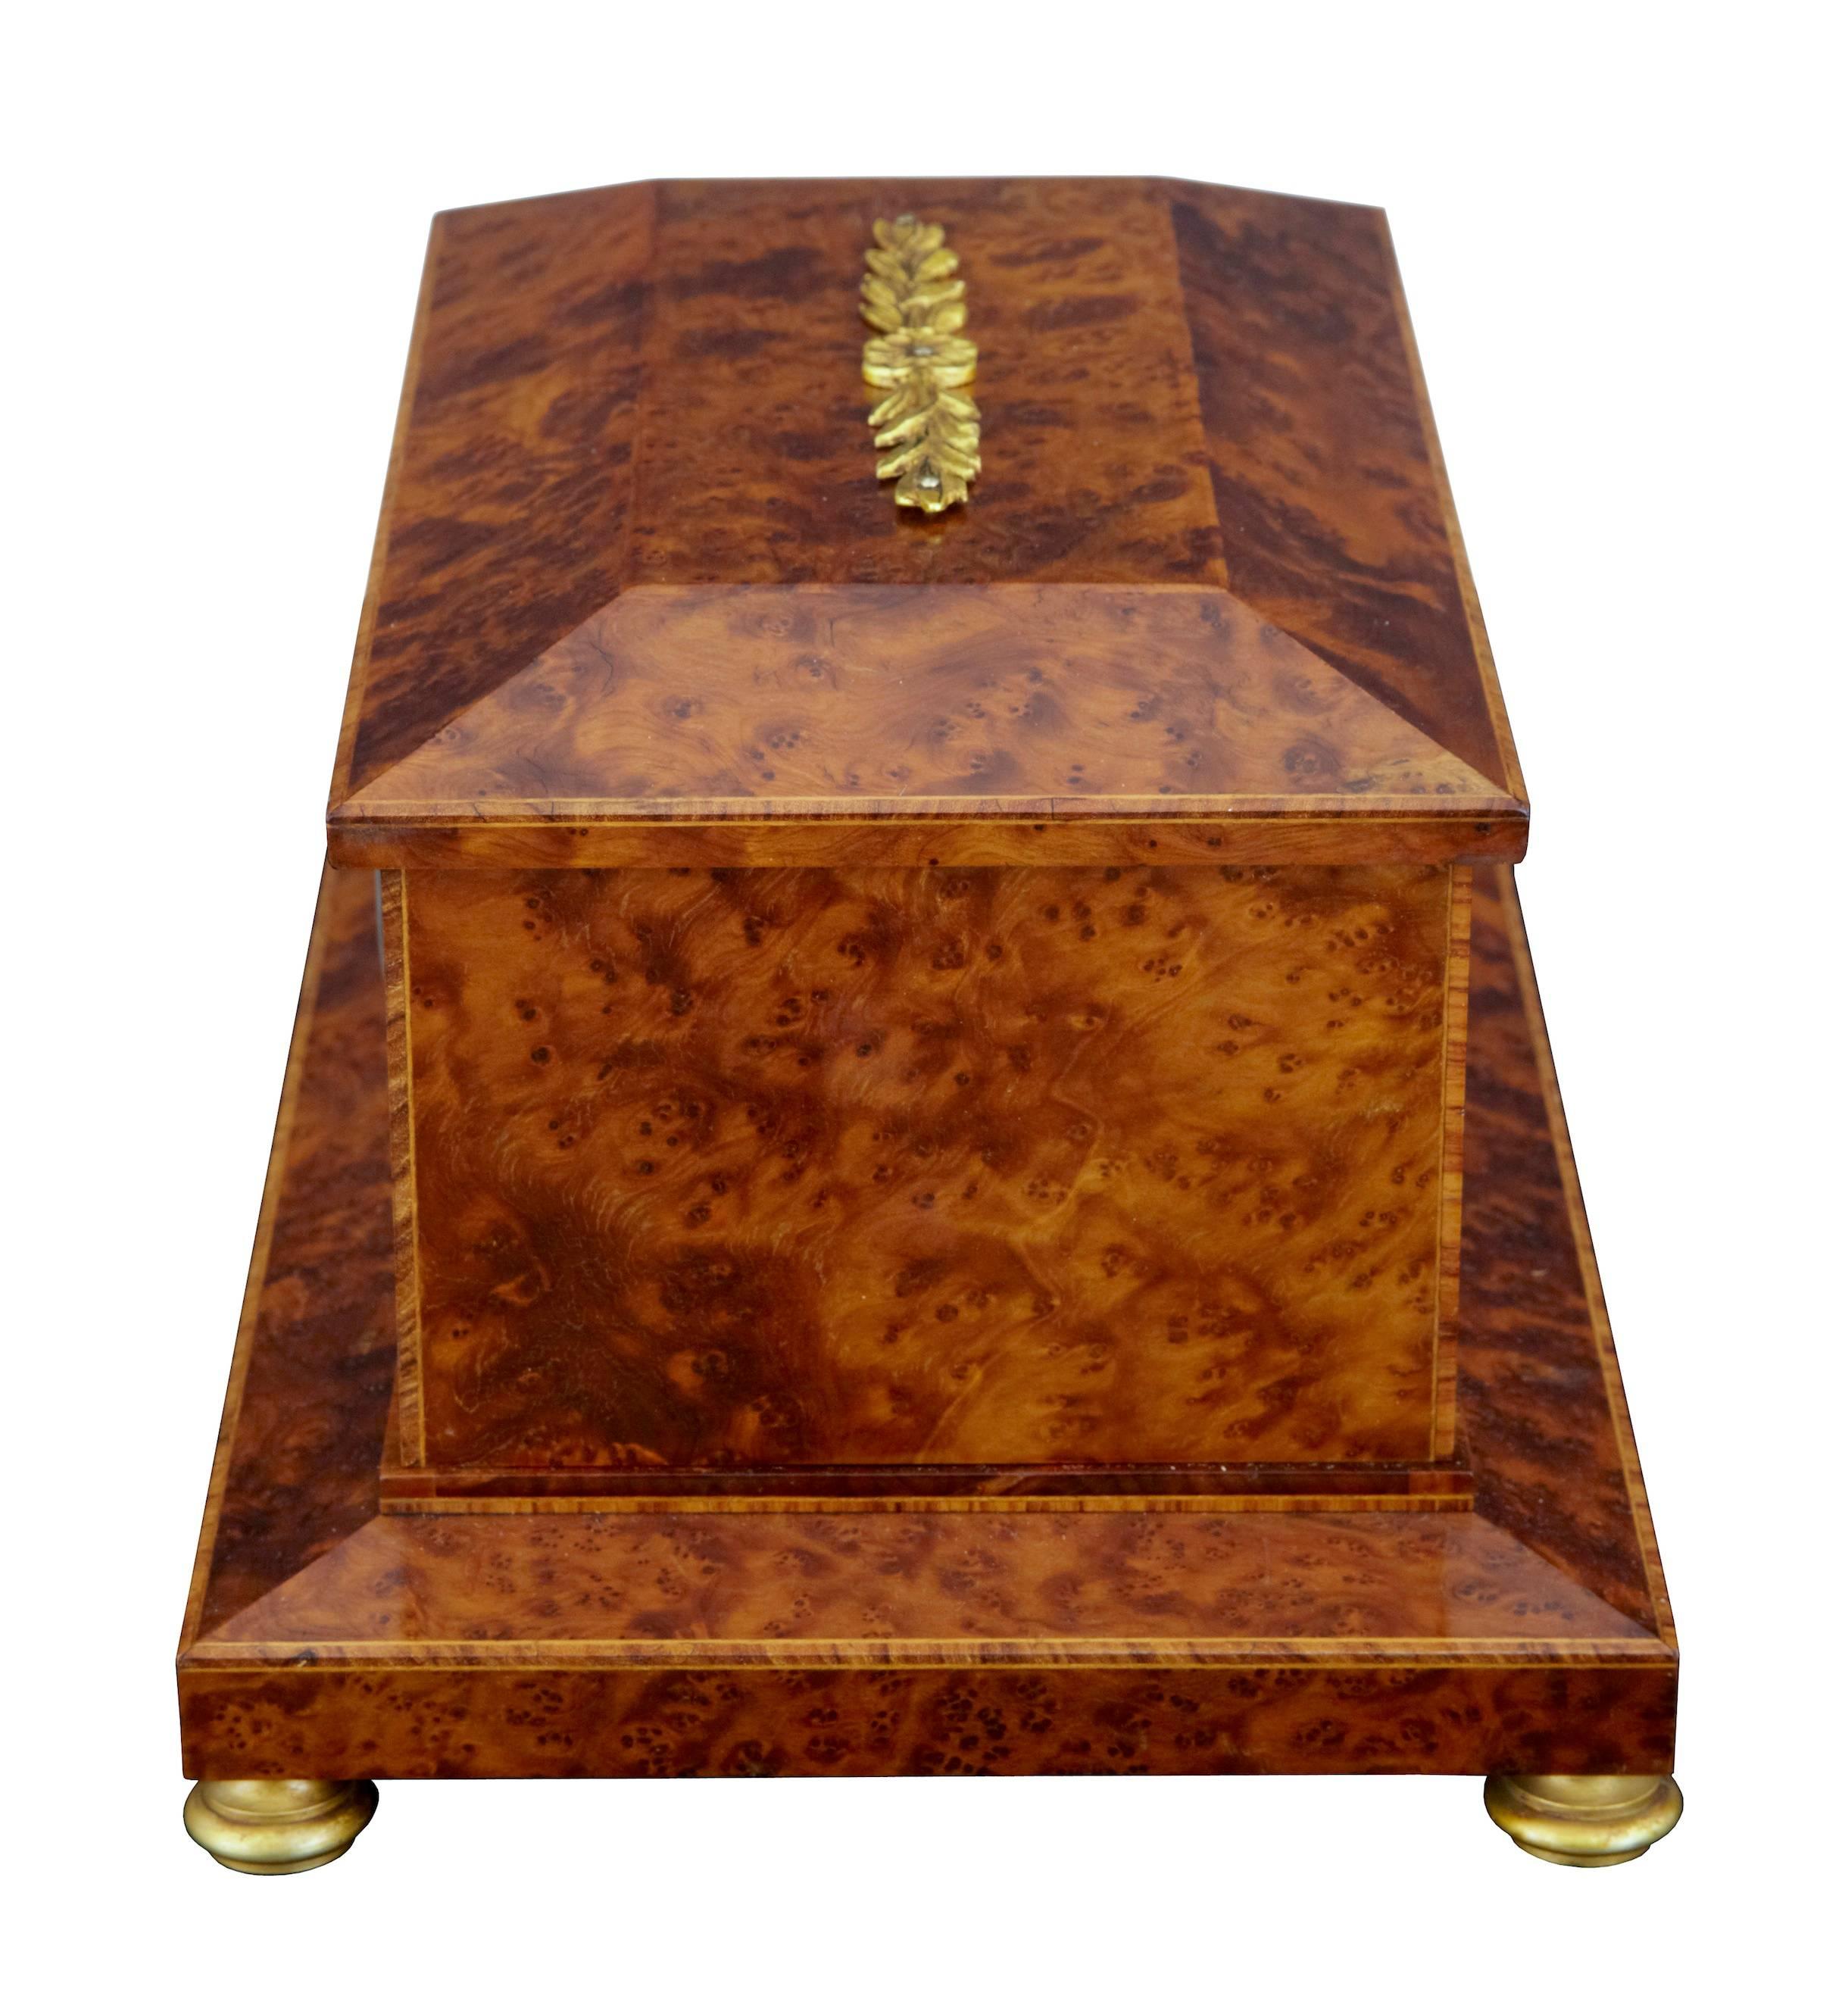 Good quality yew box in the empire taste, circa 1920. Strung and inlaid, with ormolu mounts and feet. Features an inset enamel clock movement. Desktop item, possible for use with cigars.

Measures: Height 6